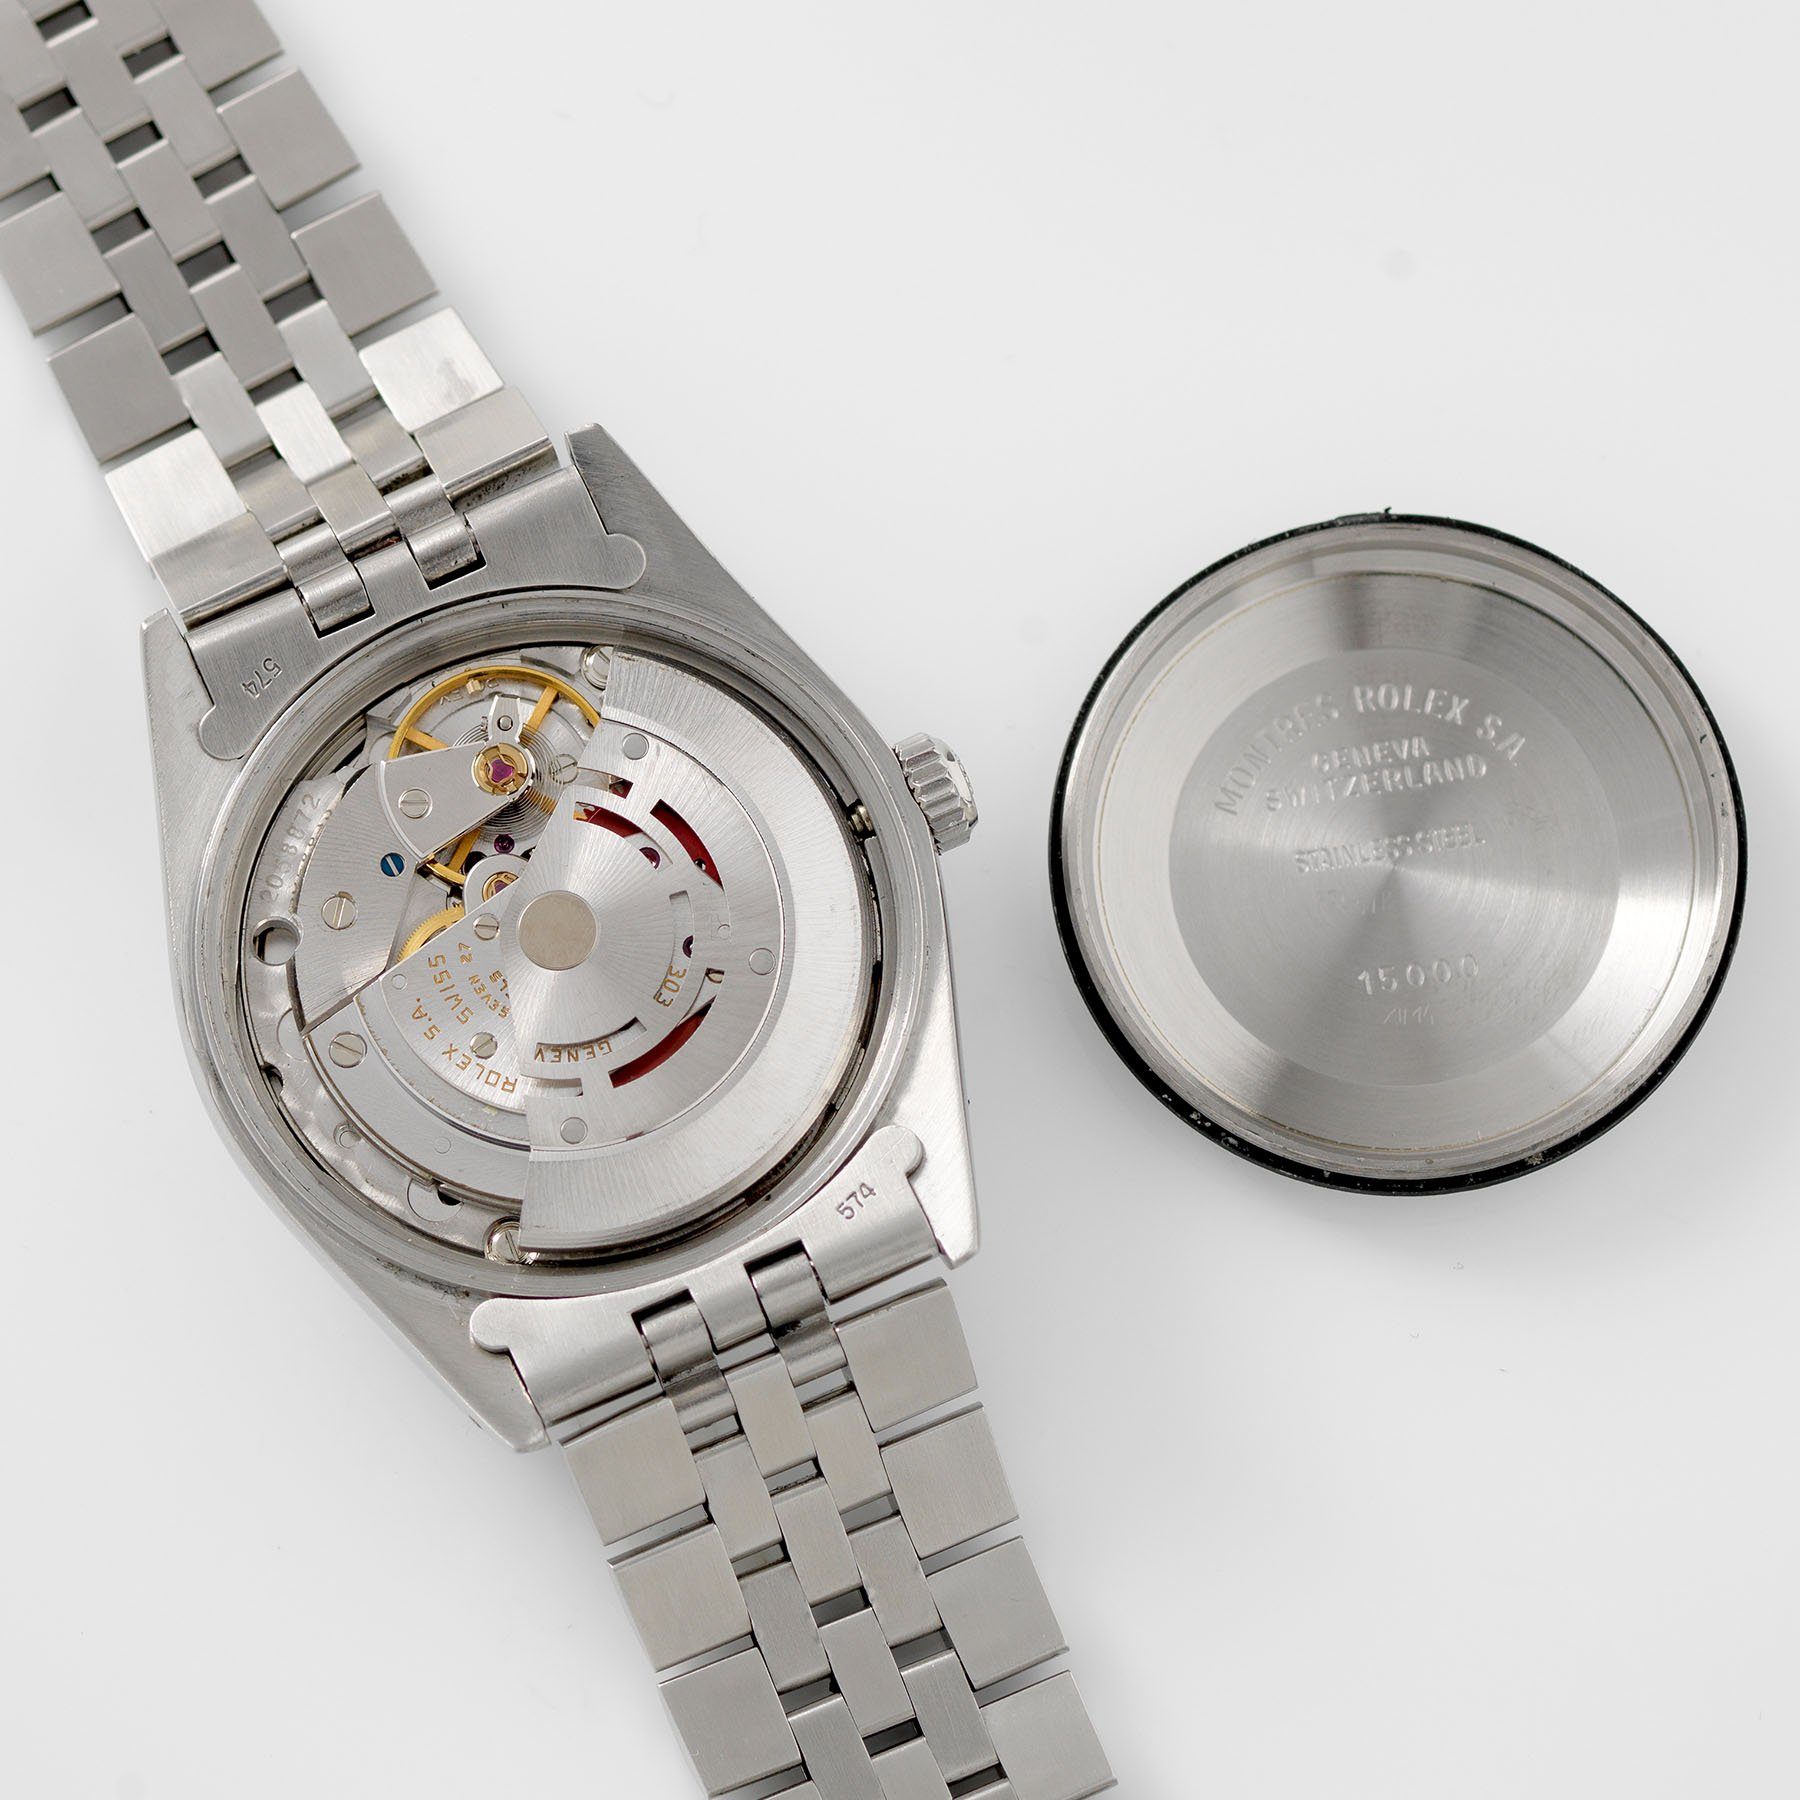 Rolex Oyster Perpetual Date Ref 15000 movement detail